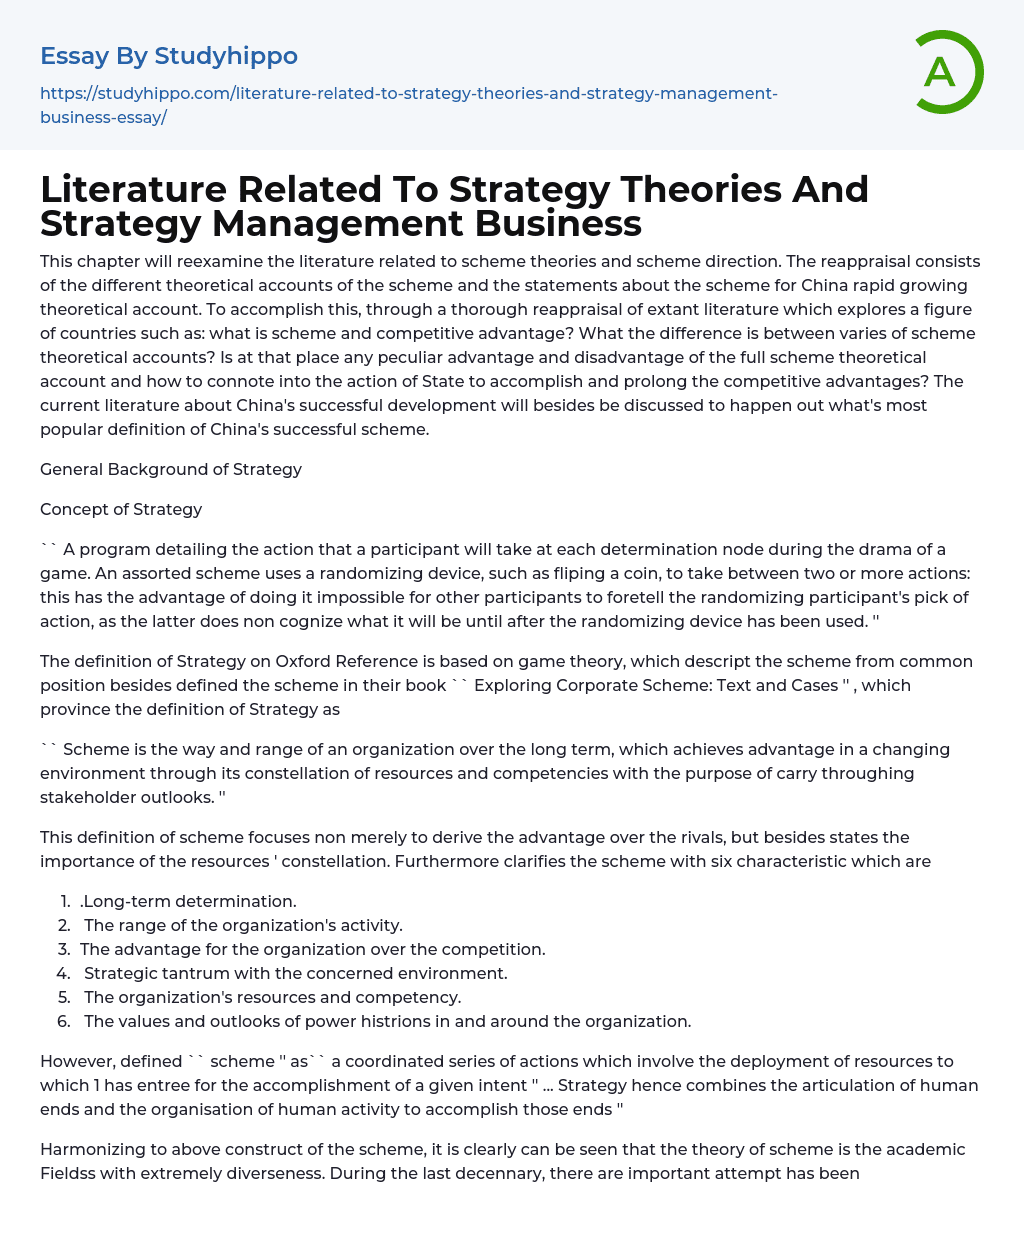 Literature Related To Strategy Theories And Strategy Management Business Essay Example